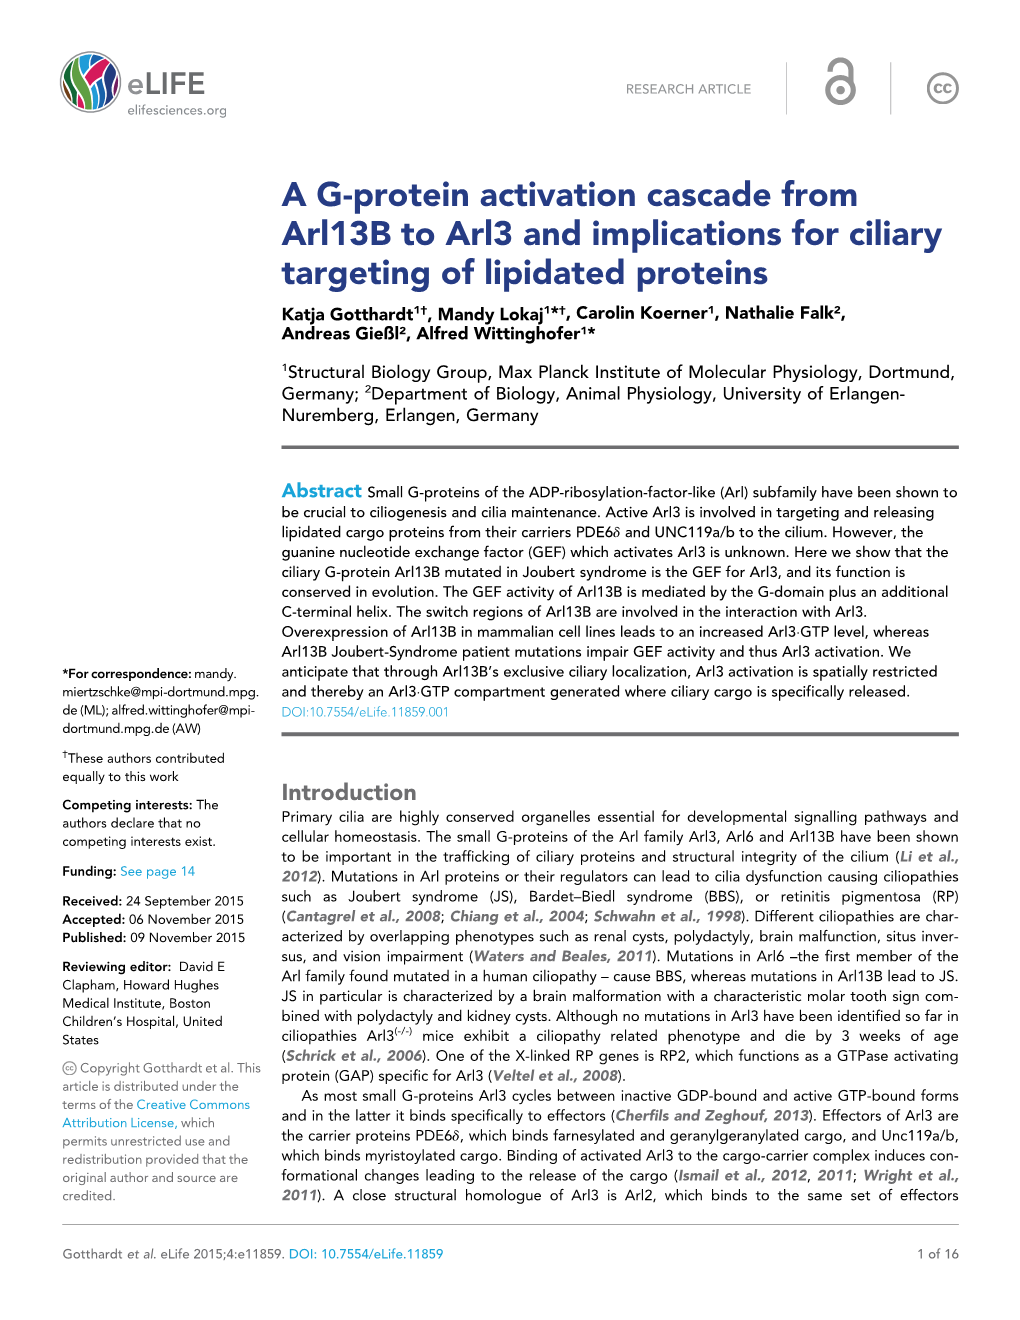 A G-Protein Activation Cascade from Arl13b to Arl3 And